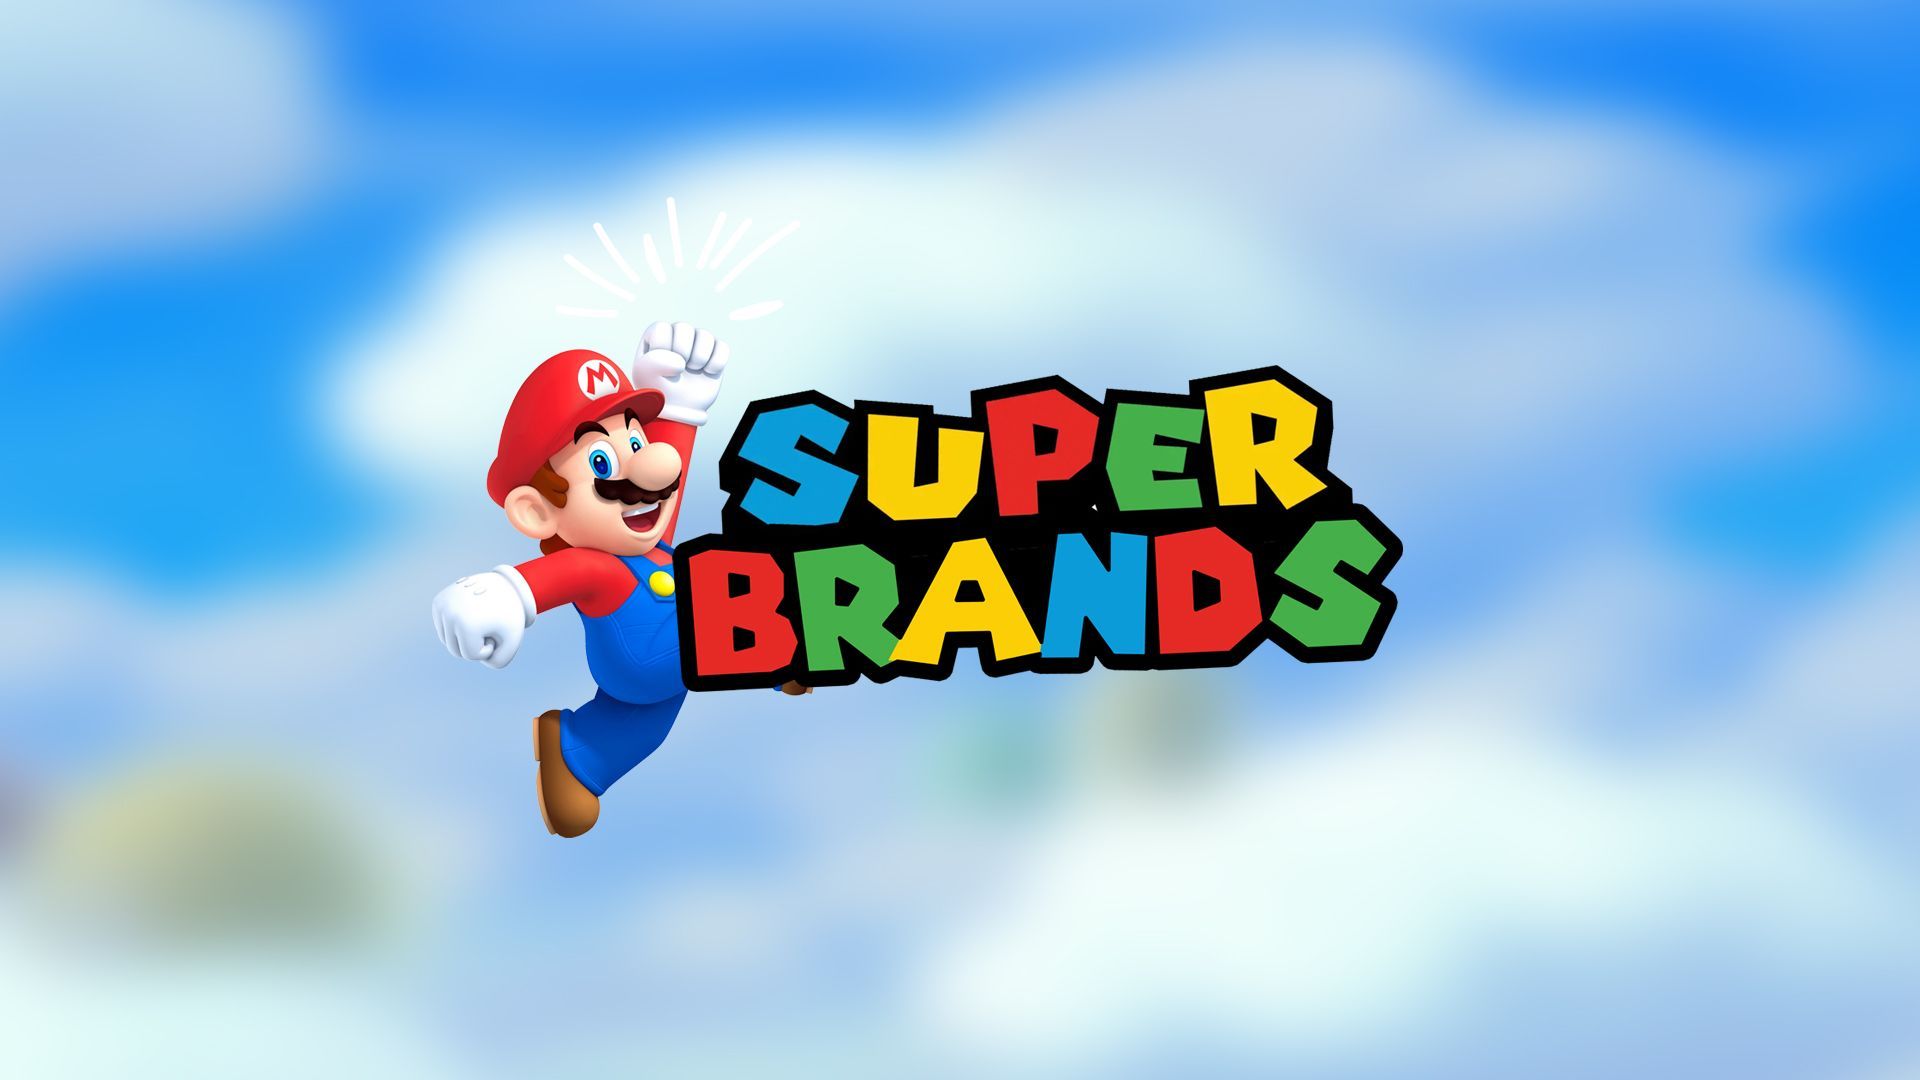 Mario is flying through the air with the words super brands behind him.